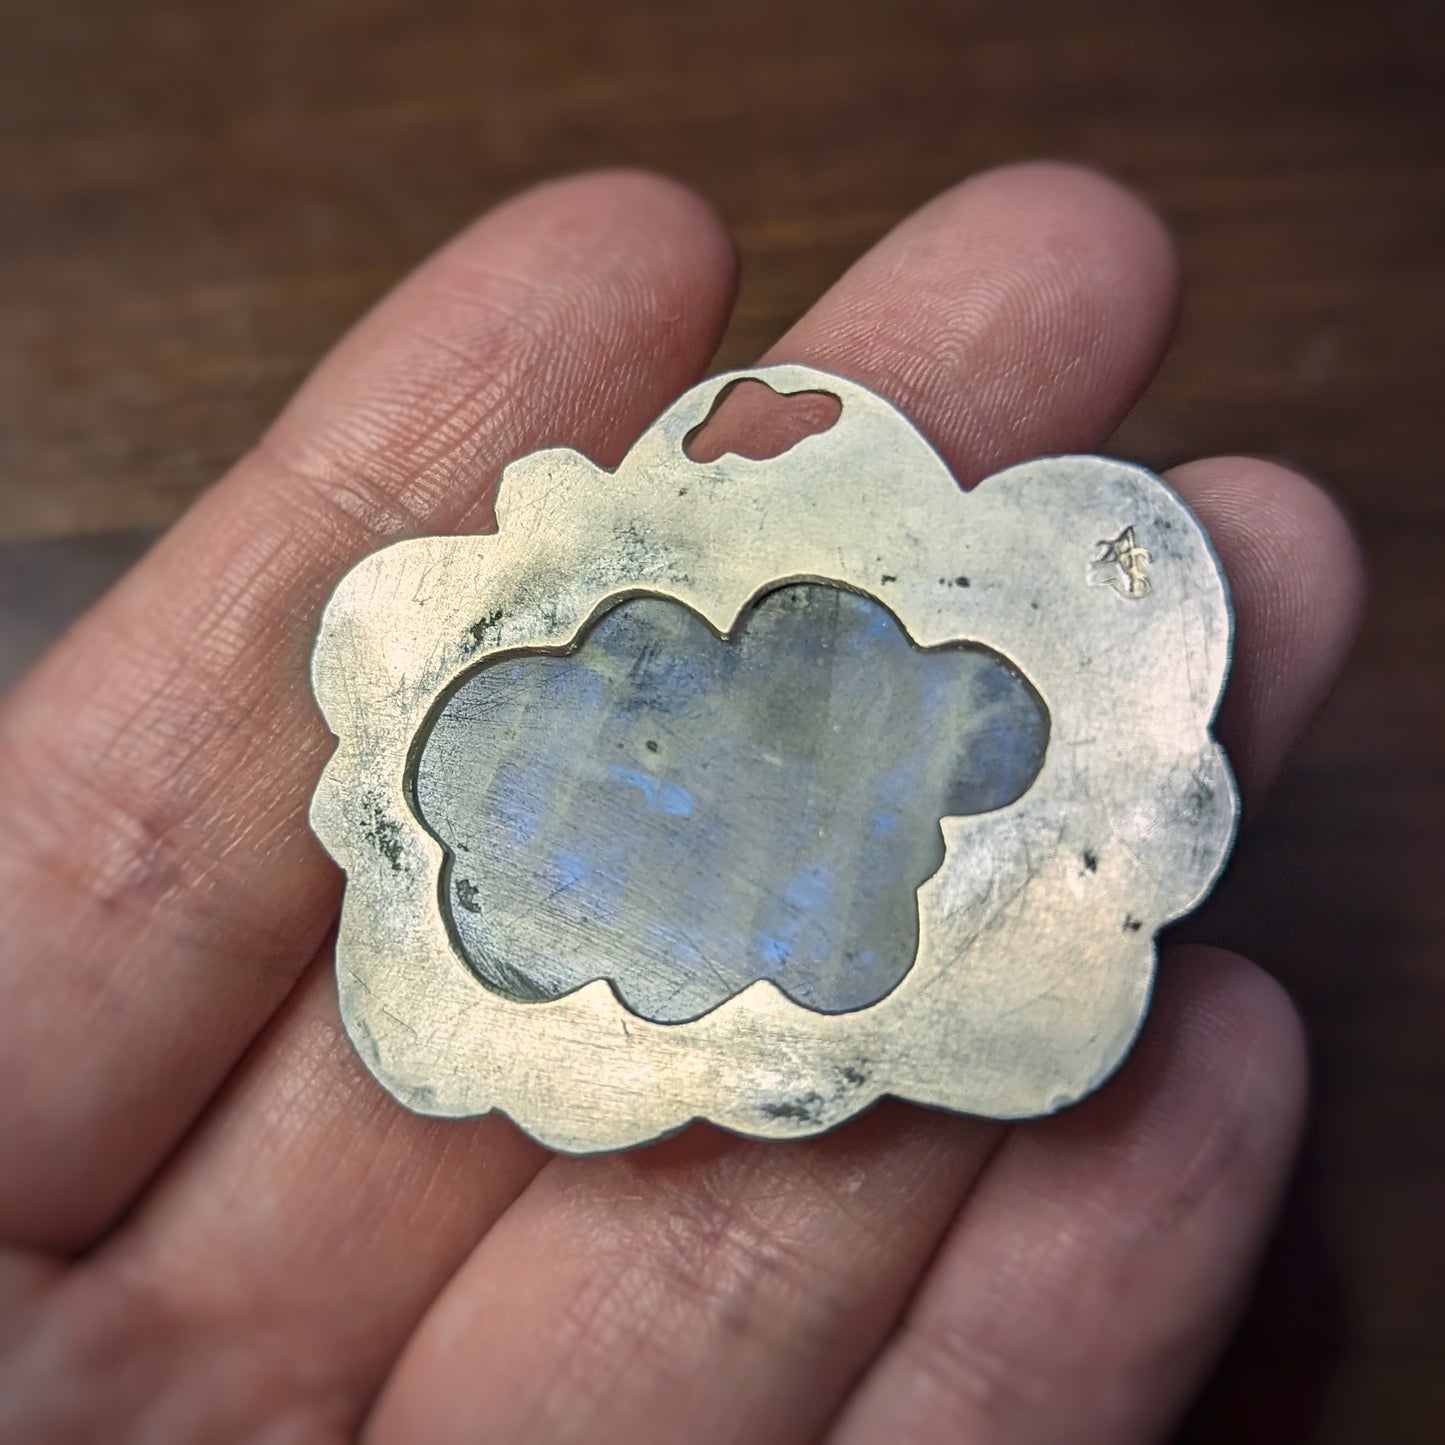 A hand holds a silver cloud pendant with a large oval moonstone in a scalloped edge setting with hammered details on the edges, specks of dark patina in the silver mimicking the tourmaline in the moonstone which flashes blue in the light.